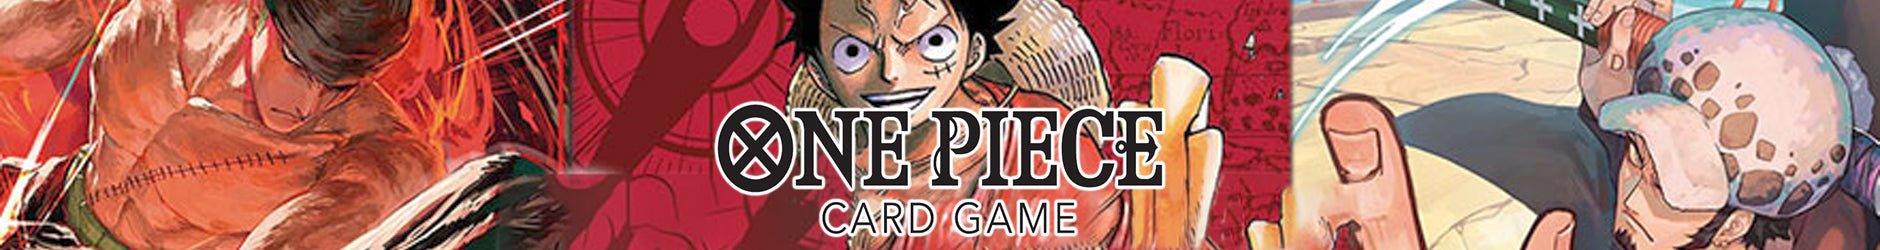 One Piece All Products - Romulus Games